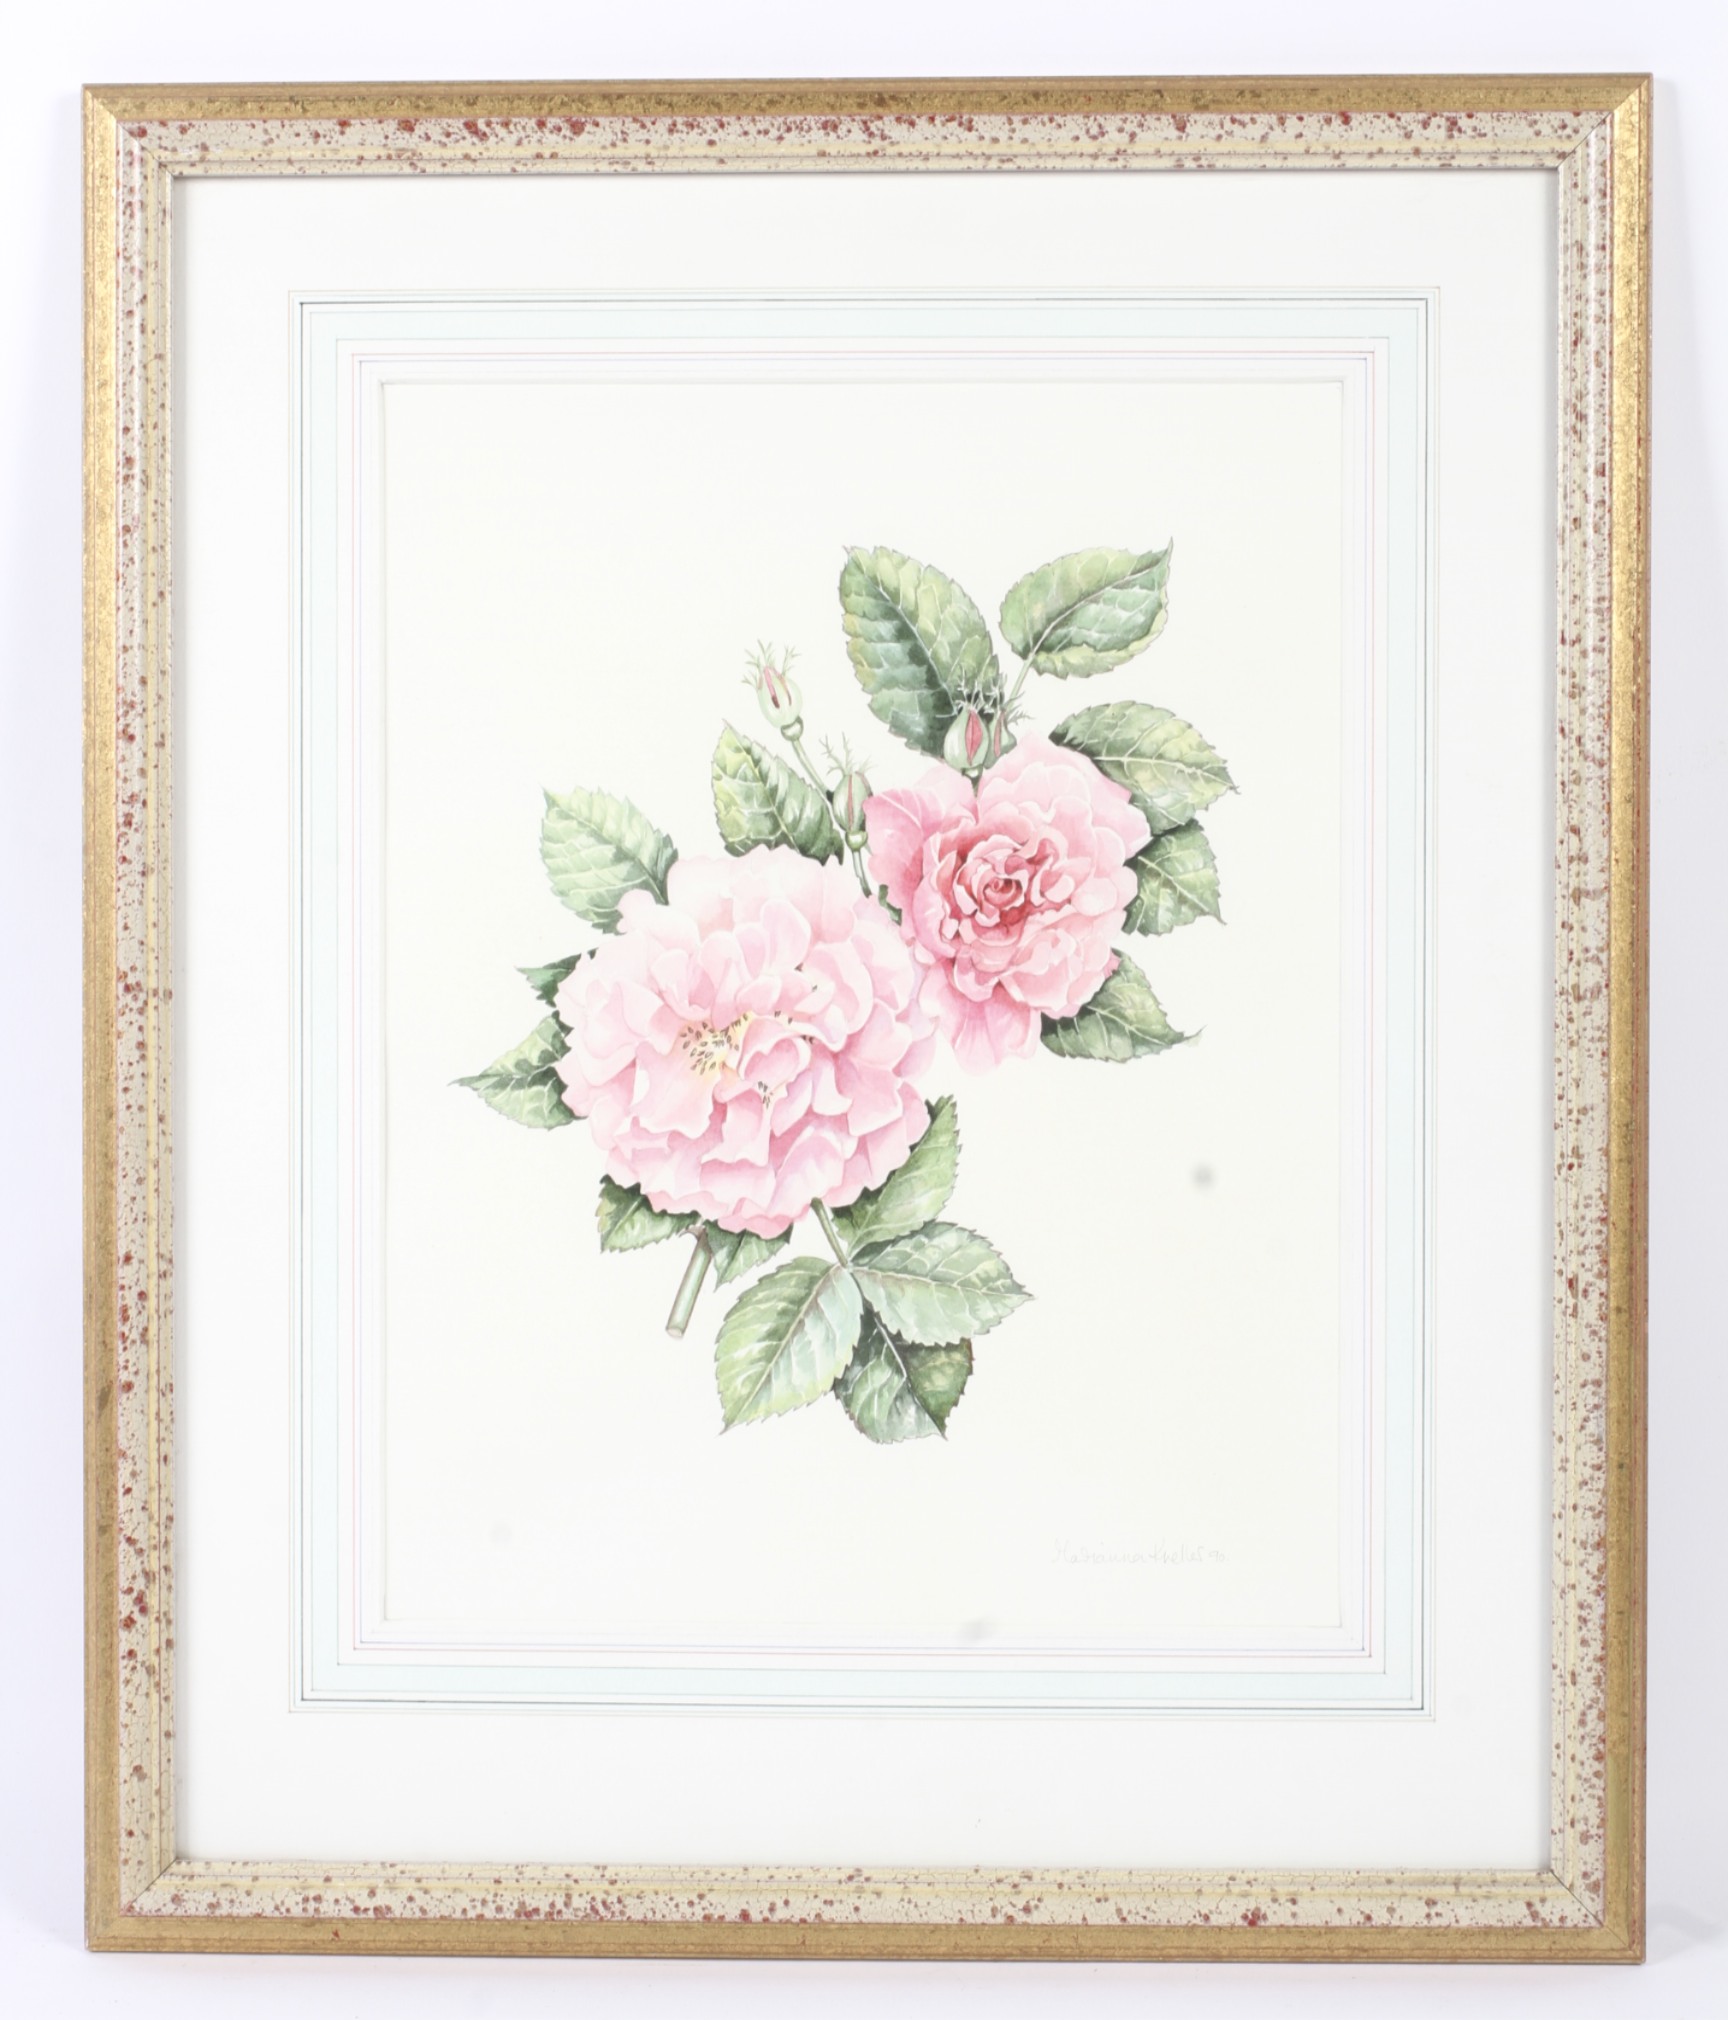 Marianna Kneller, a study of a pink rose spray, watercolour. - Image 2 of 3